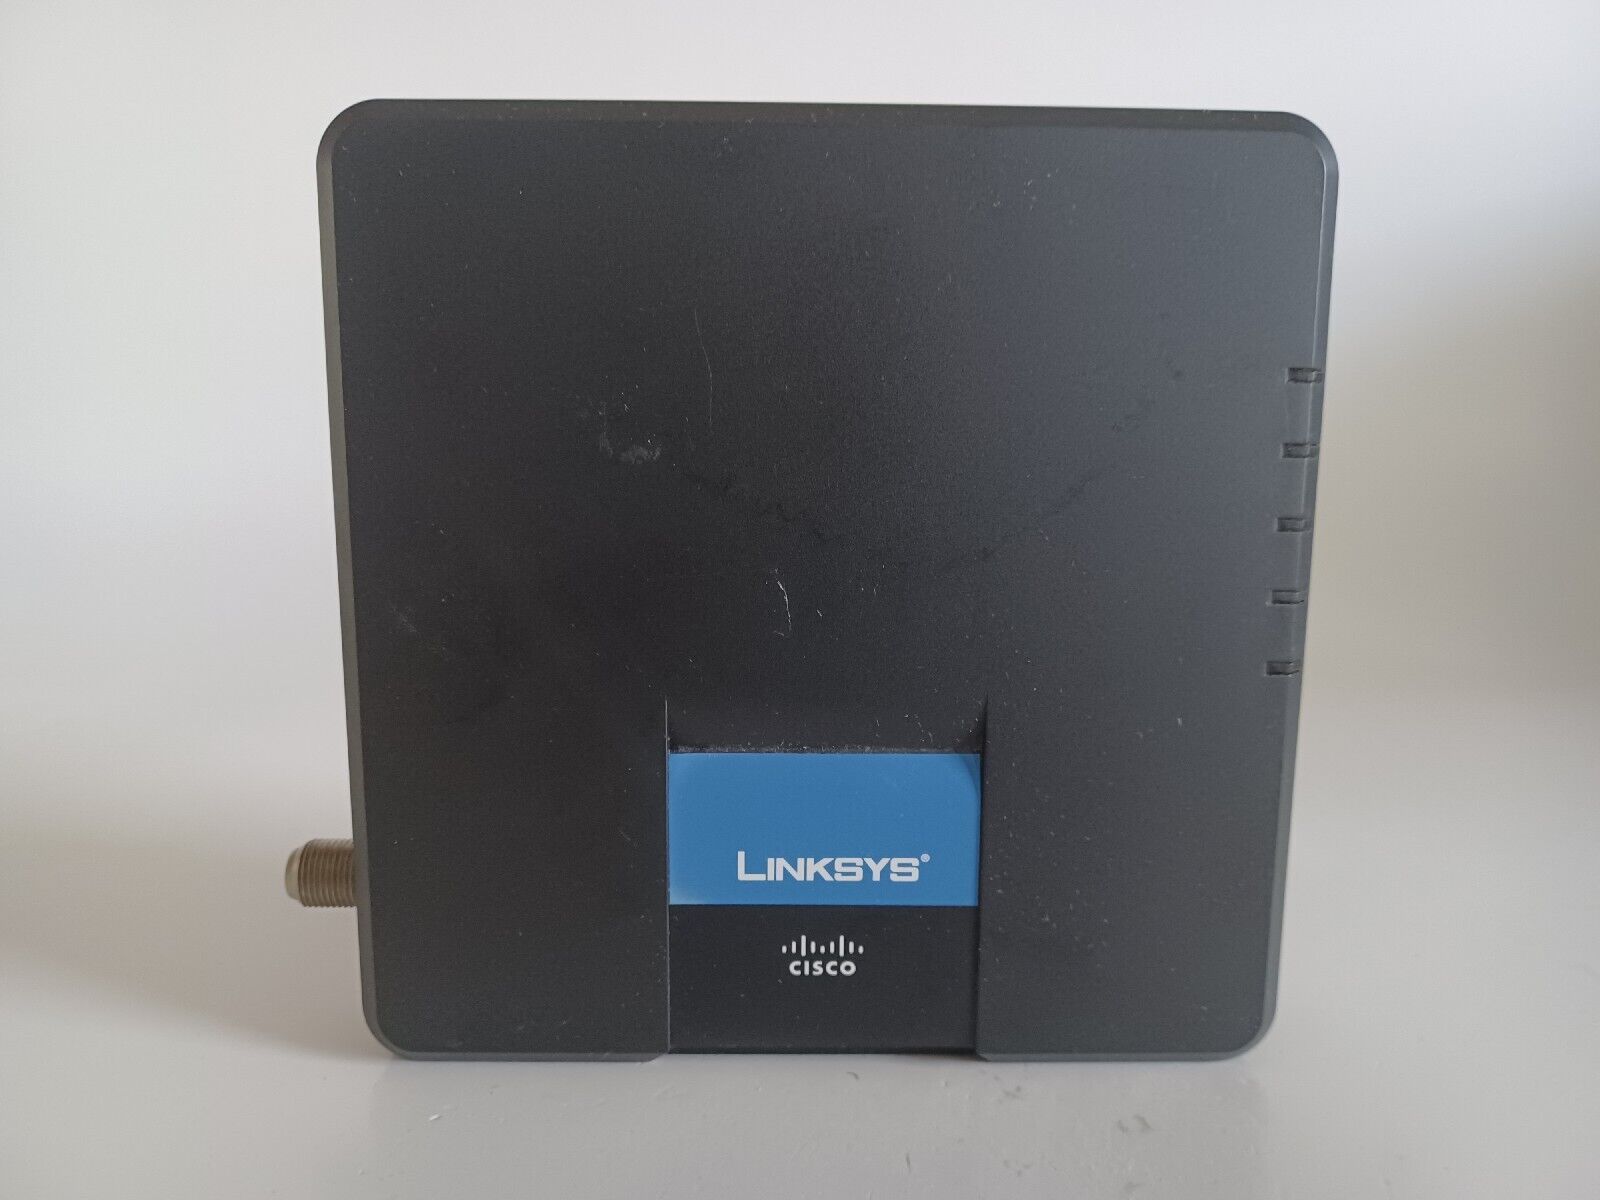 Cisco-Linksys Cable Modem with Ethernet USB Connection. CM100 Brand New 